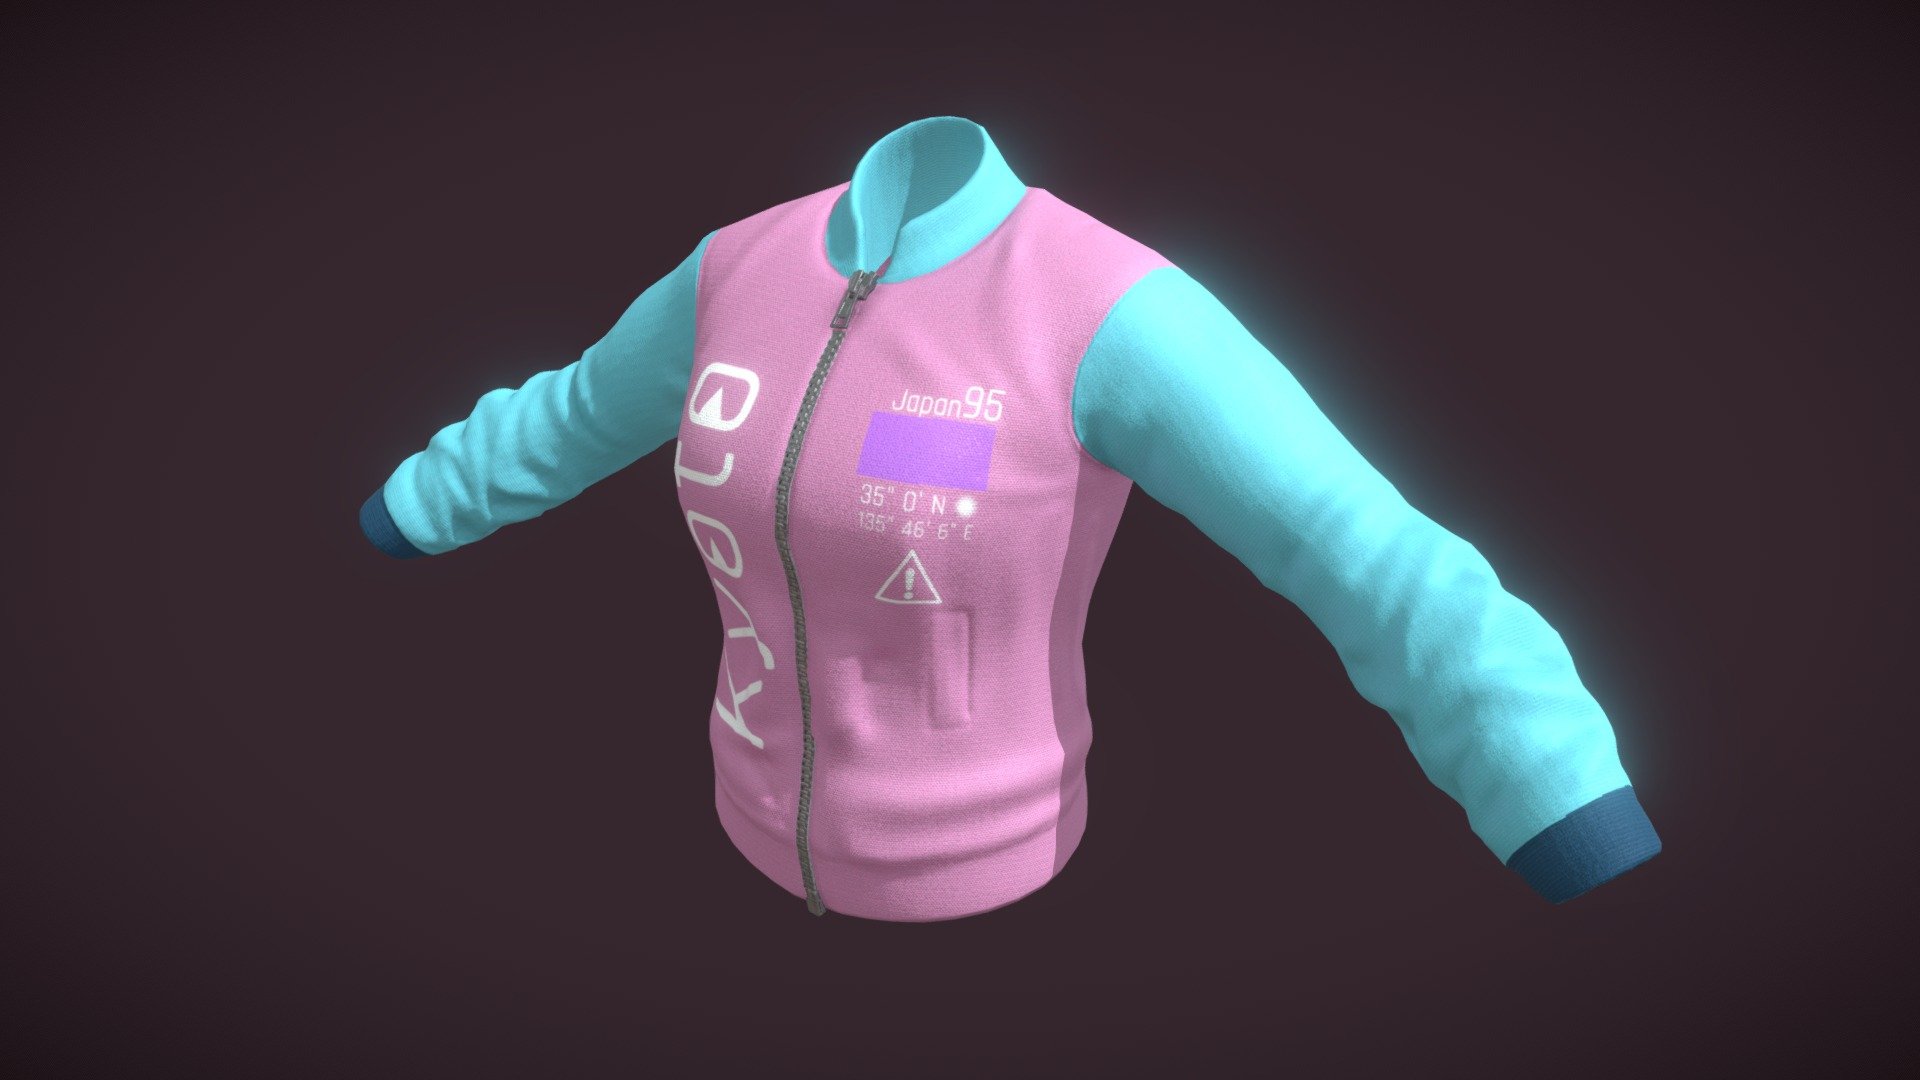 Bomber Jacket designed for college course. Modeled in Maya, Sculpted in ZBrush, Retopologized and UV'd in Maya, Textured in Subtance Painter - Kyoto Bomber Jacket - 3D model by dreamtop 3d model